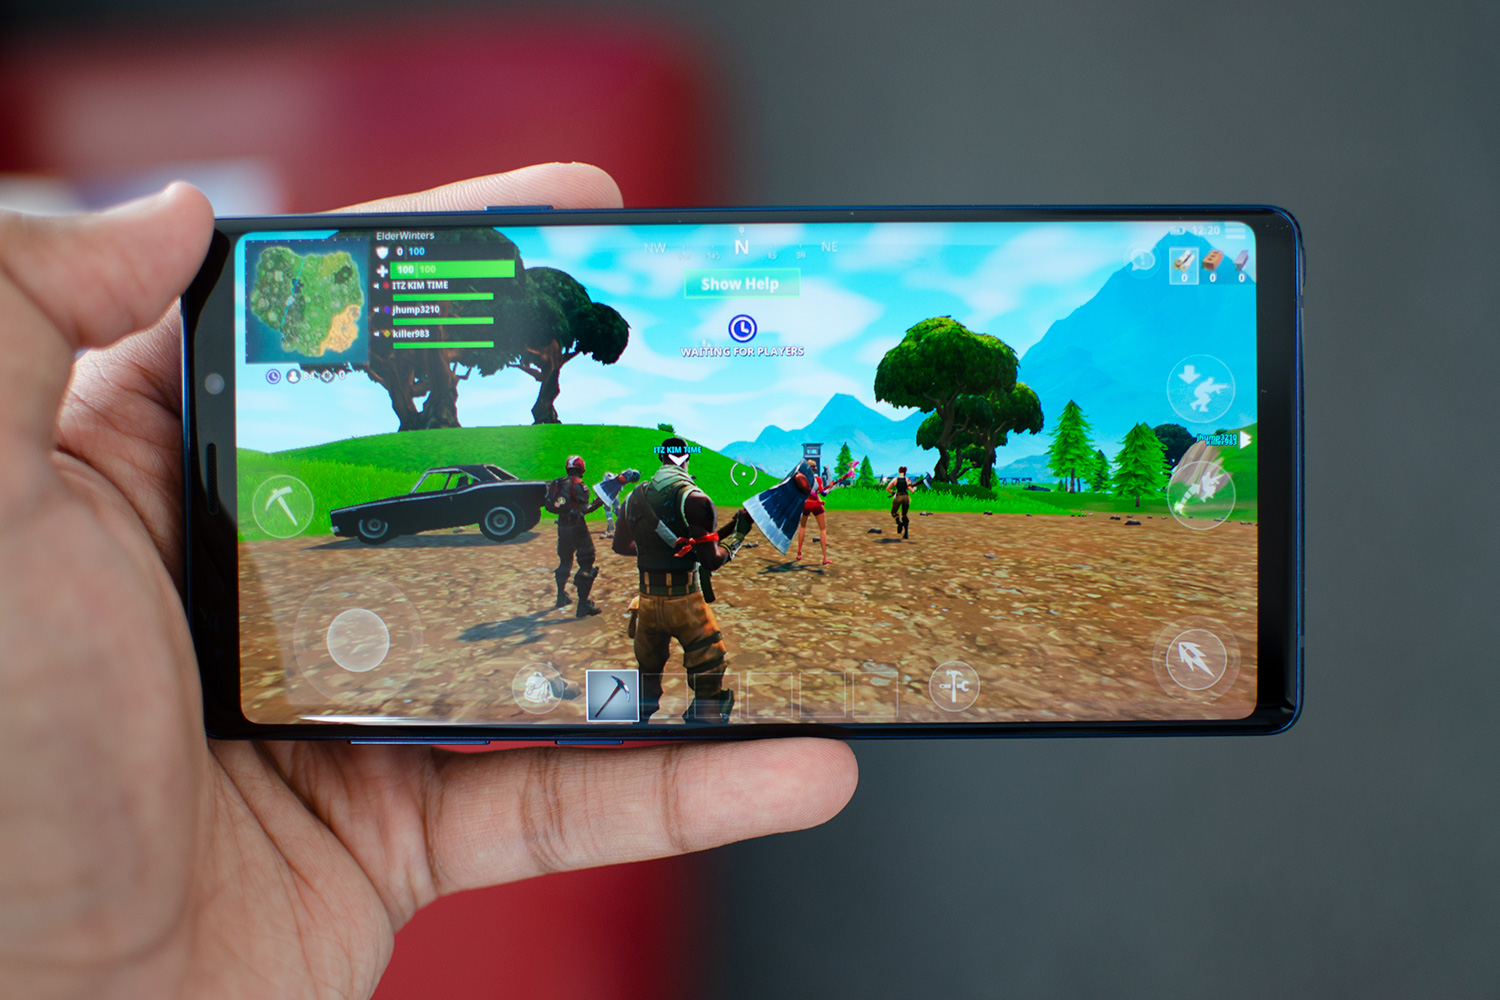 Epic Games launches Fortnite on the Google Play Store and they're not happy  about it